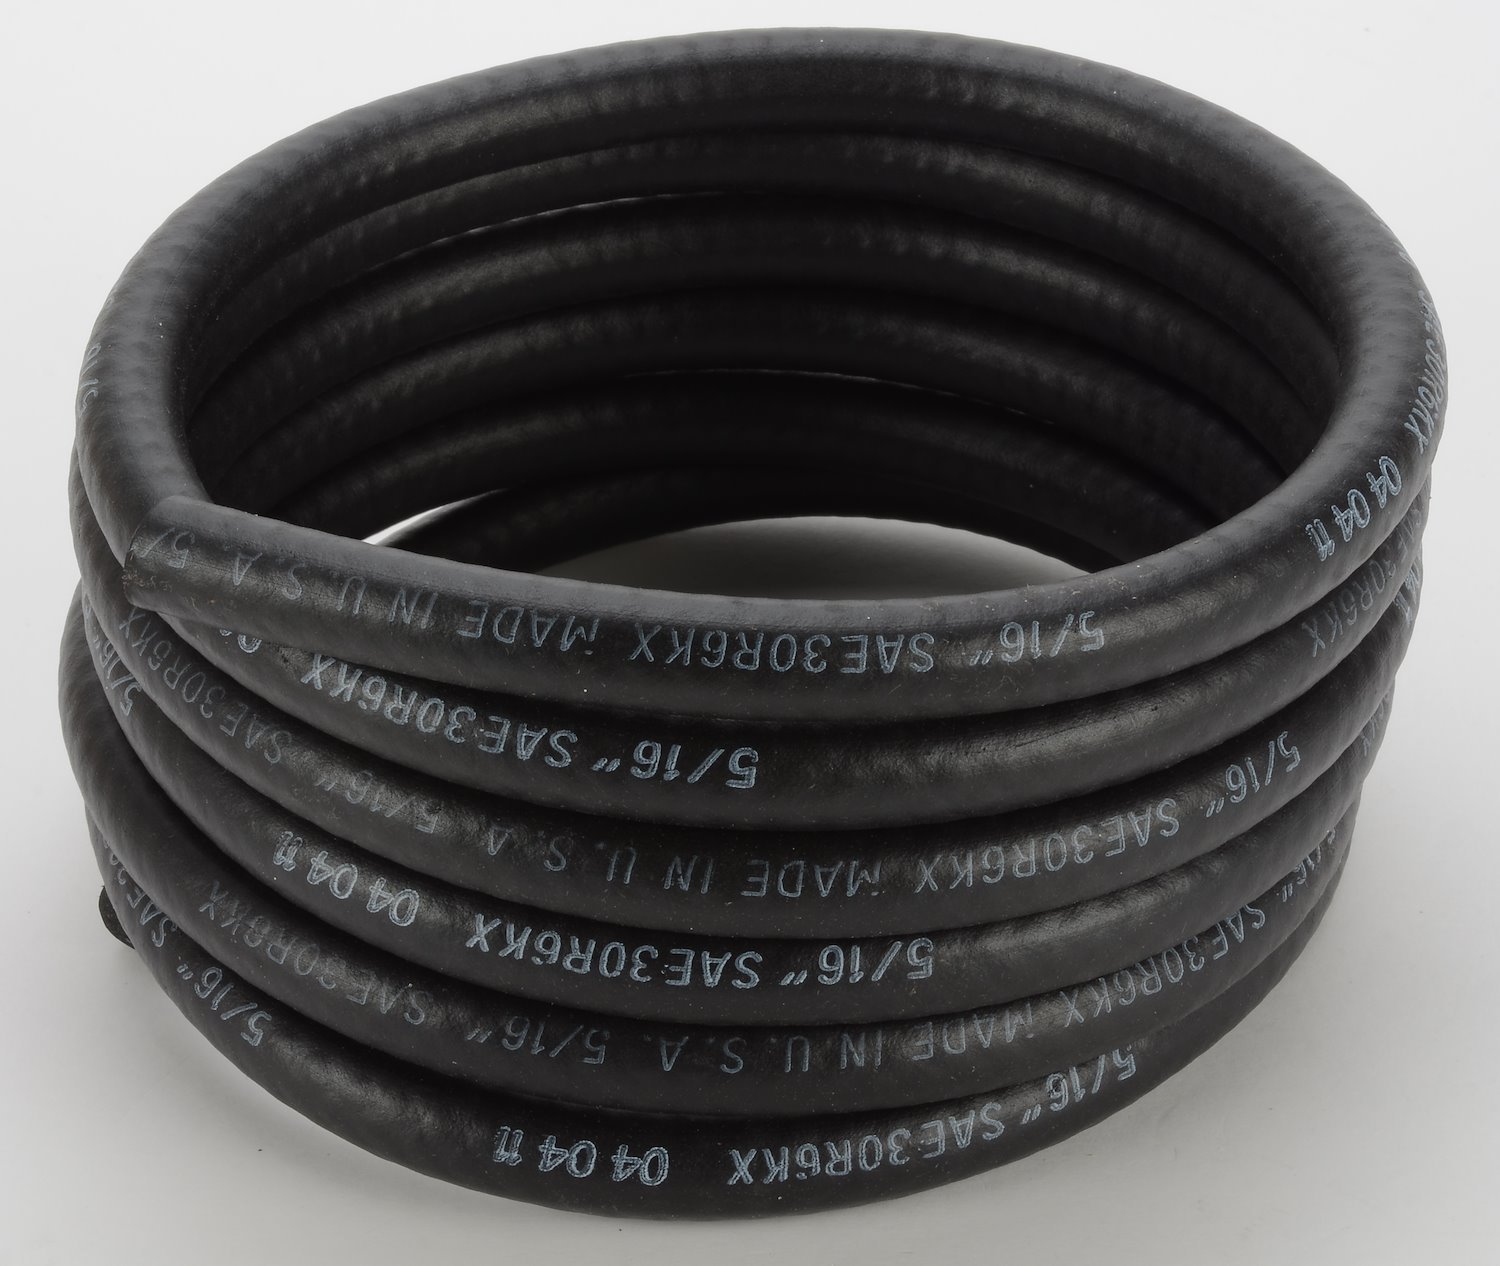 Universal Fuel Hose [5/16 in. I.D. x 10 ft.]